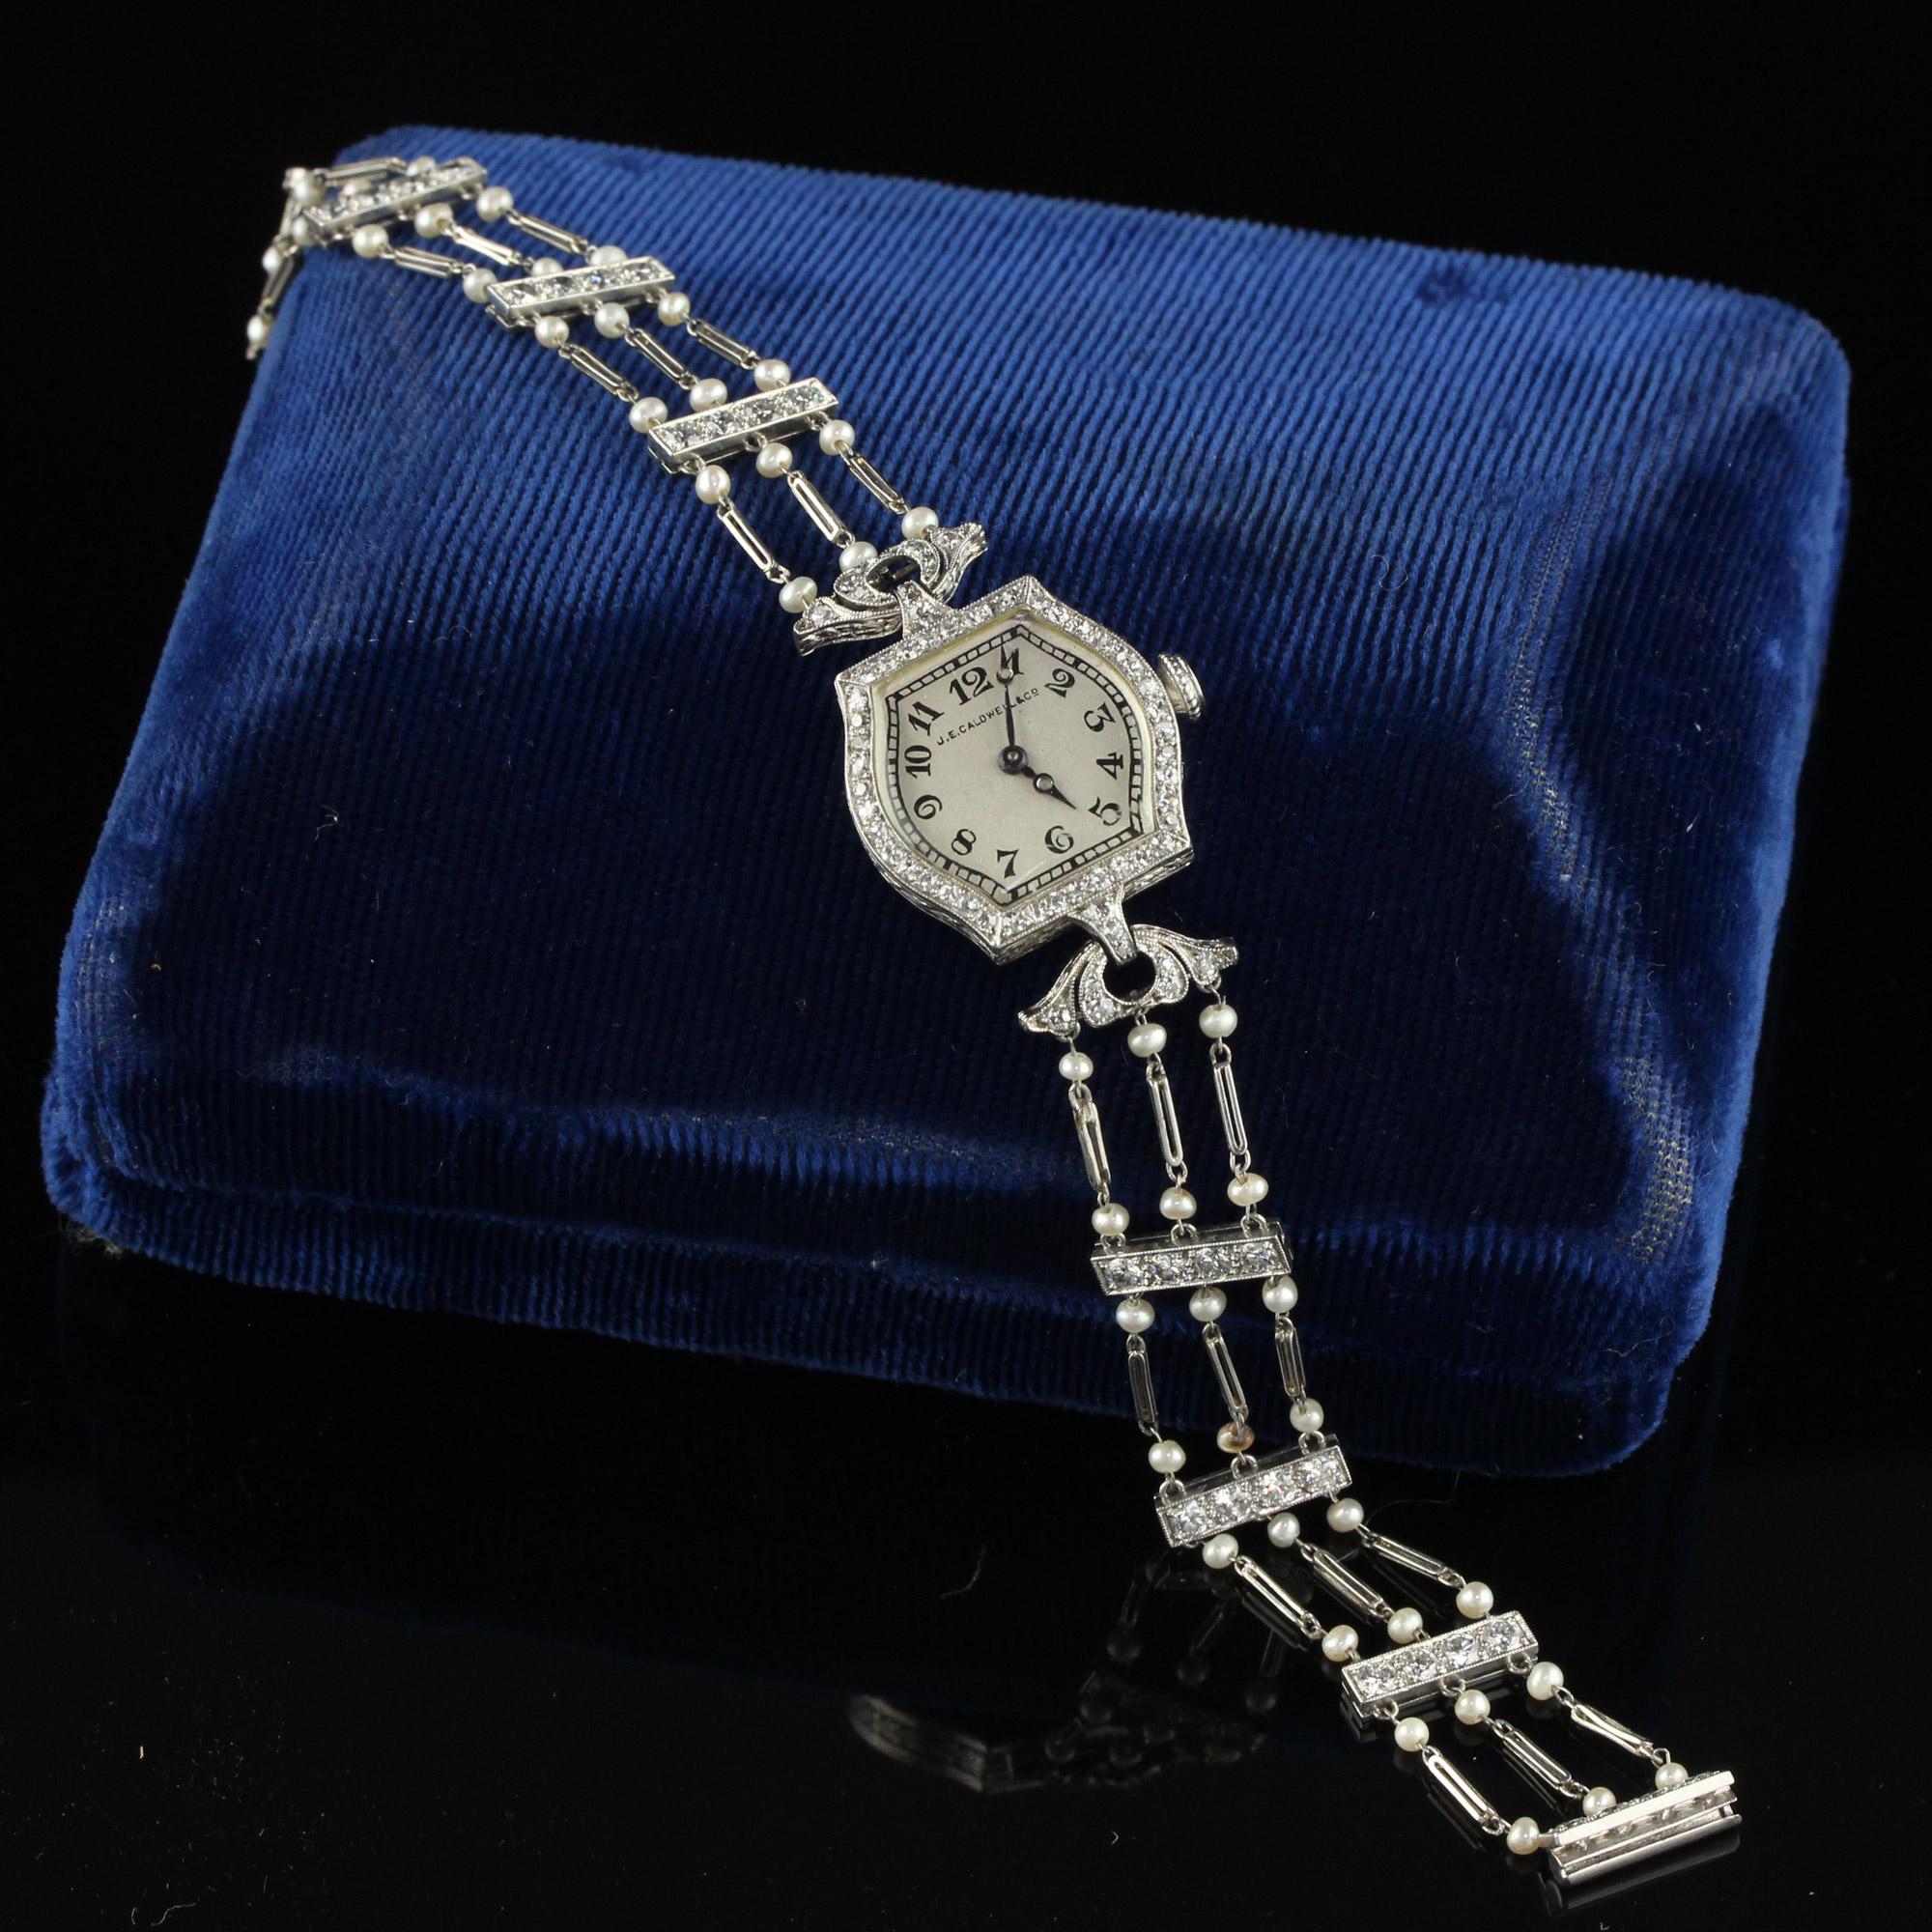 Beautiful Antique Art Deco J. E. Caldwell Old Euro Diamond and Pearl Evening Watch. This gorgeous J.E. Caldwell watch is crafted in platinum. This gorgeous watch has old European cut diamonds set in each station and has natural pearls set throughout